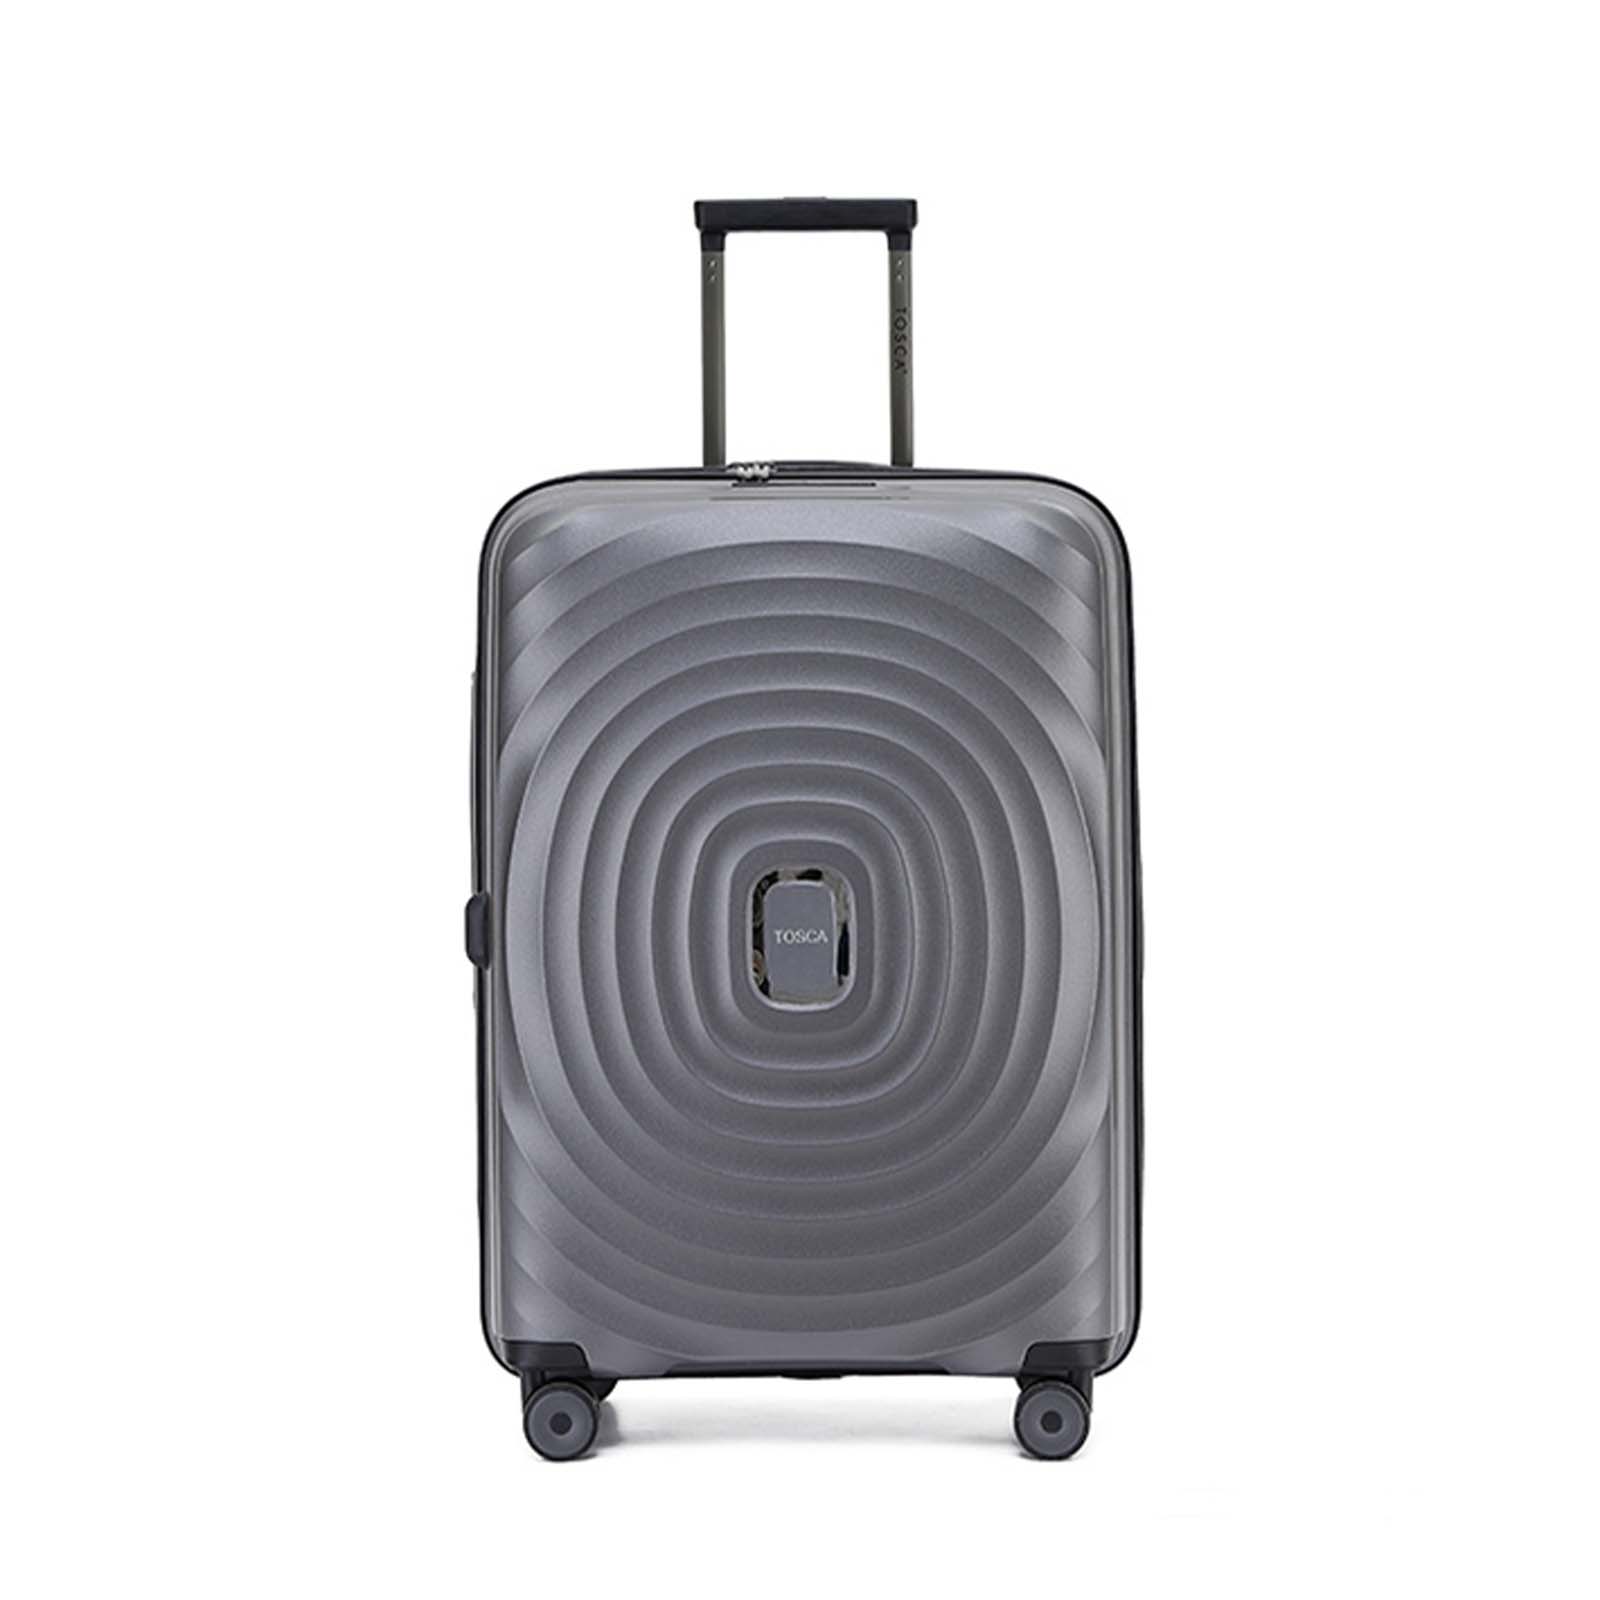 tosca-eclipse-4-wheel-67cm-carry-on-suitcase-charcoal-front